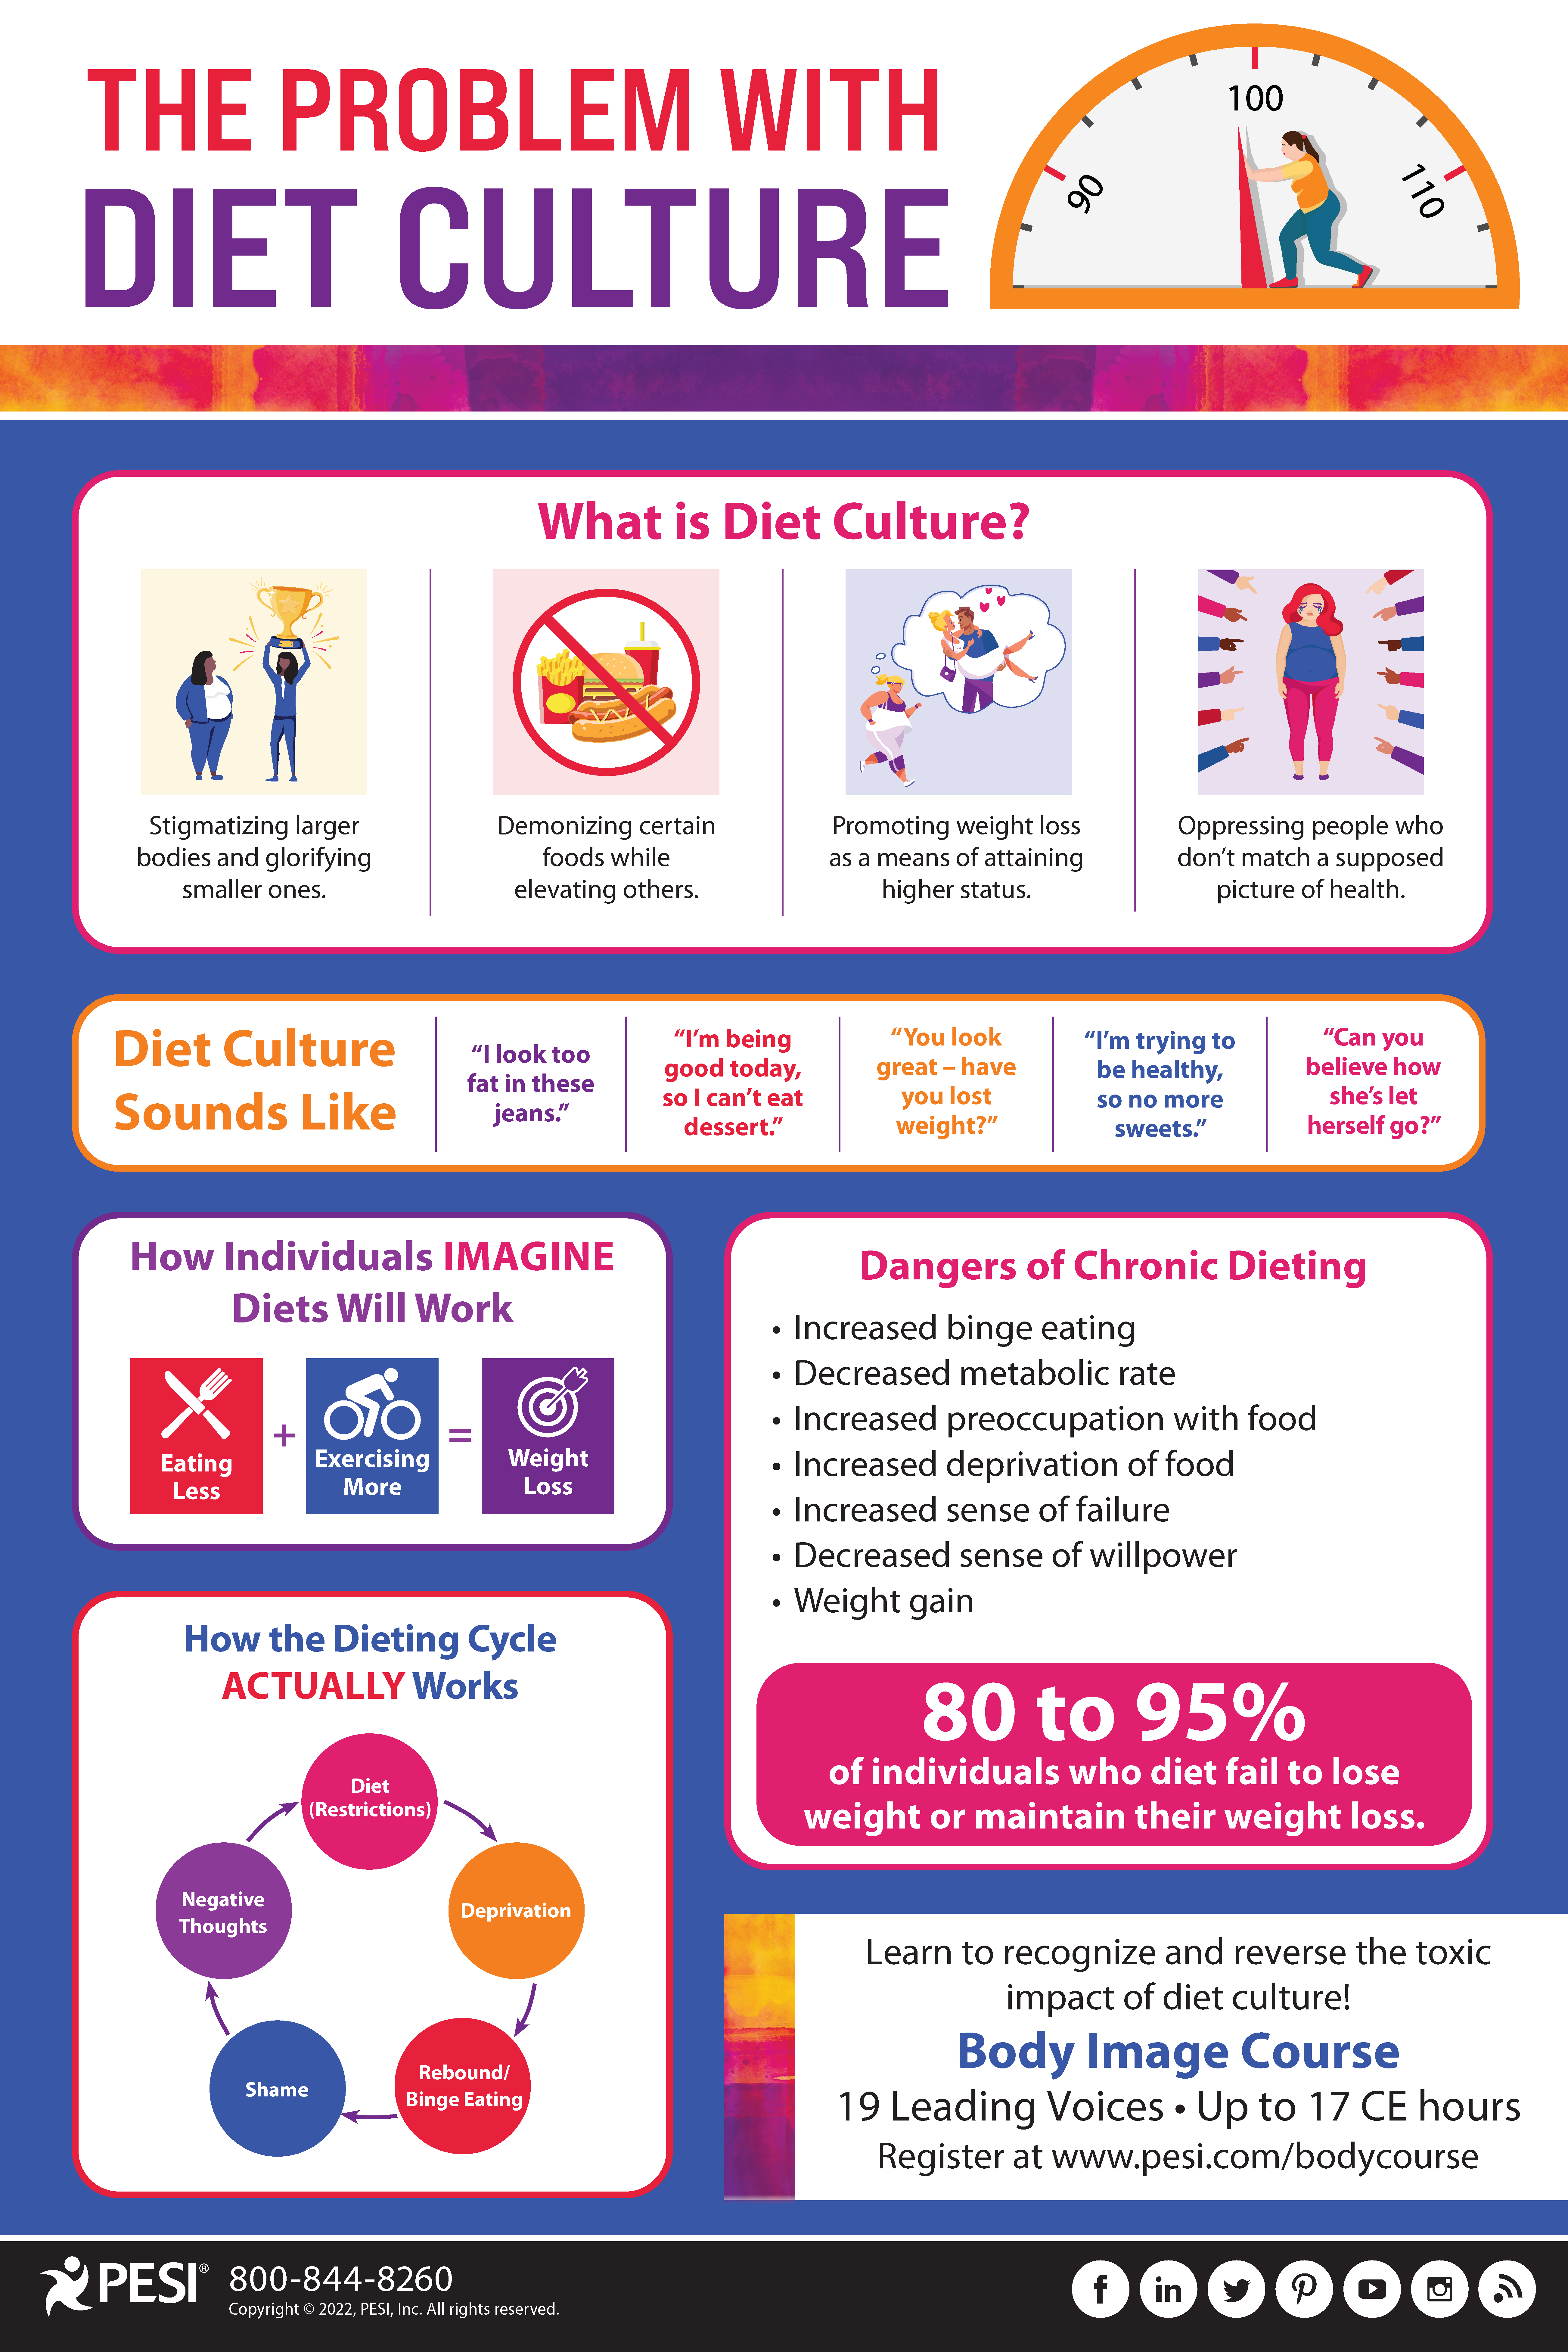 The Problem with Diet Culture